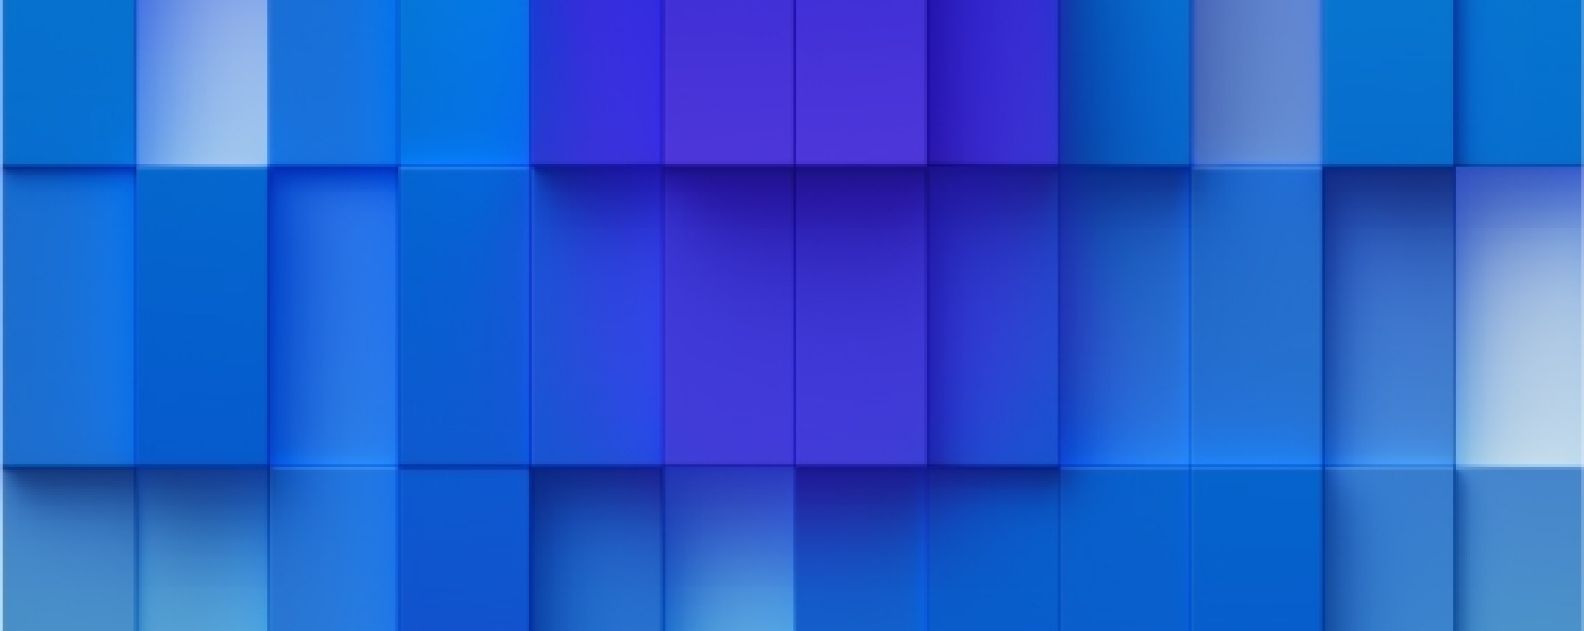 Squares in a gradient format